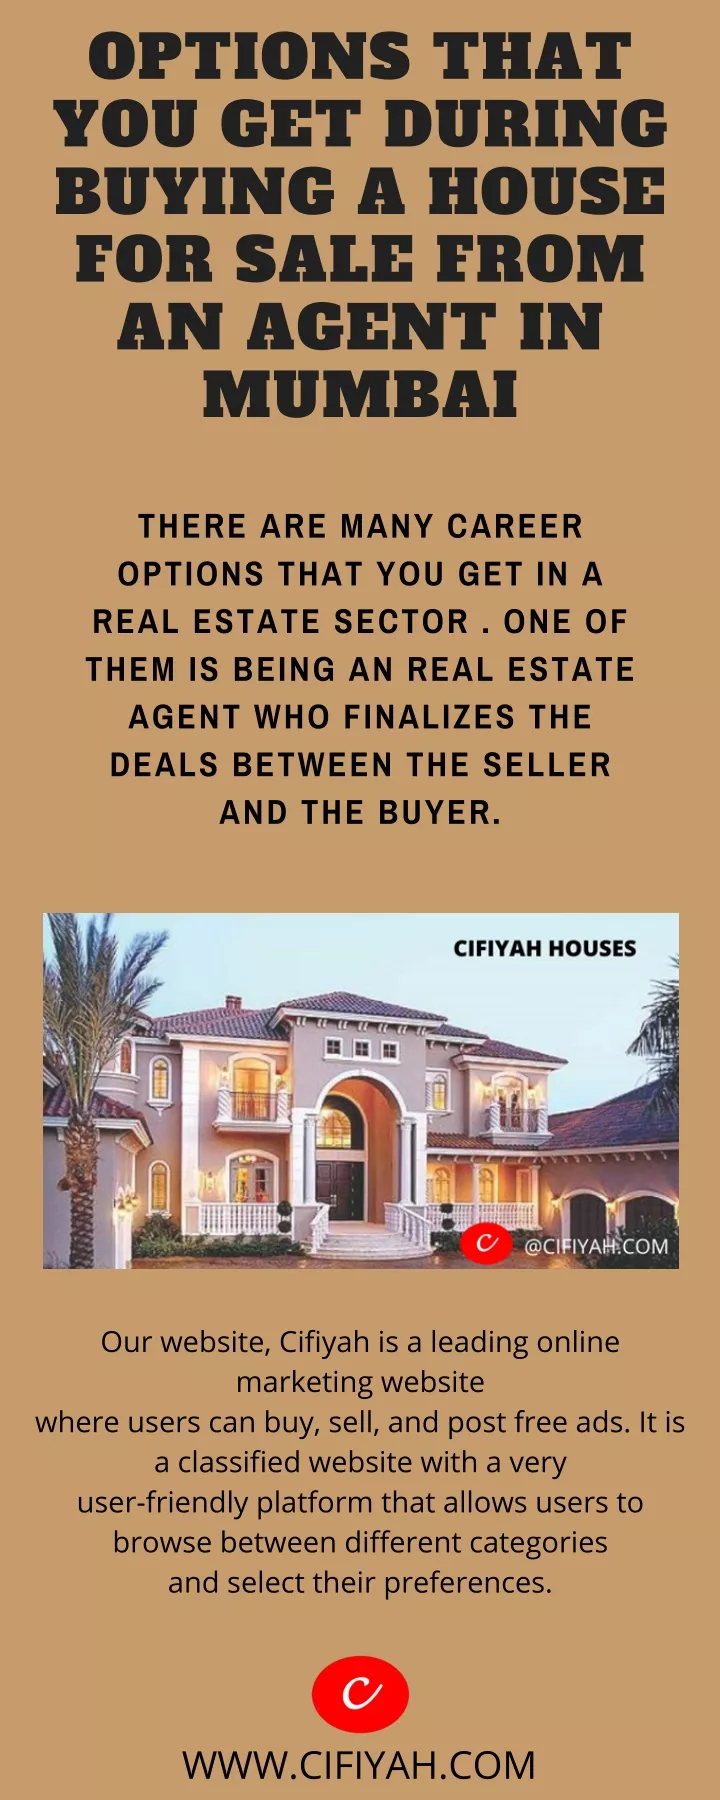 options that you get during buying a house